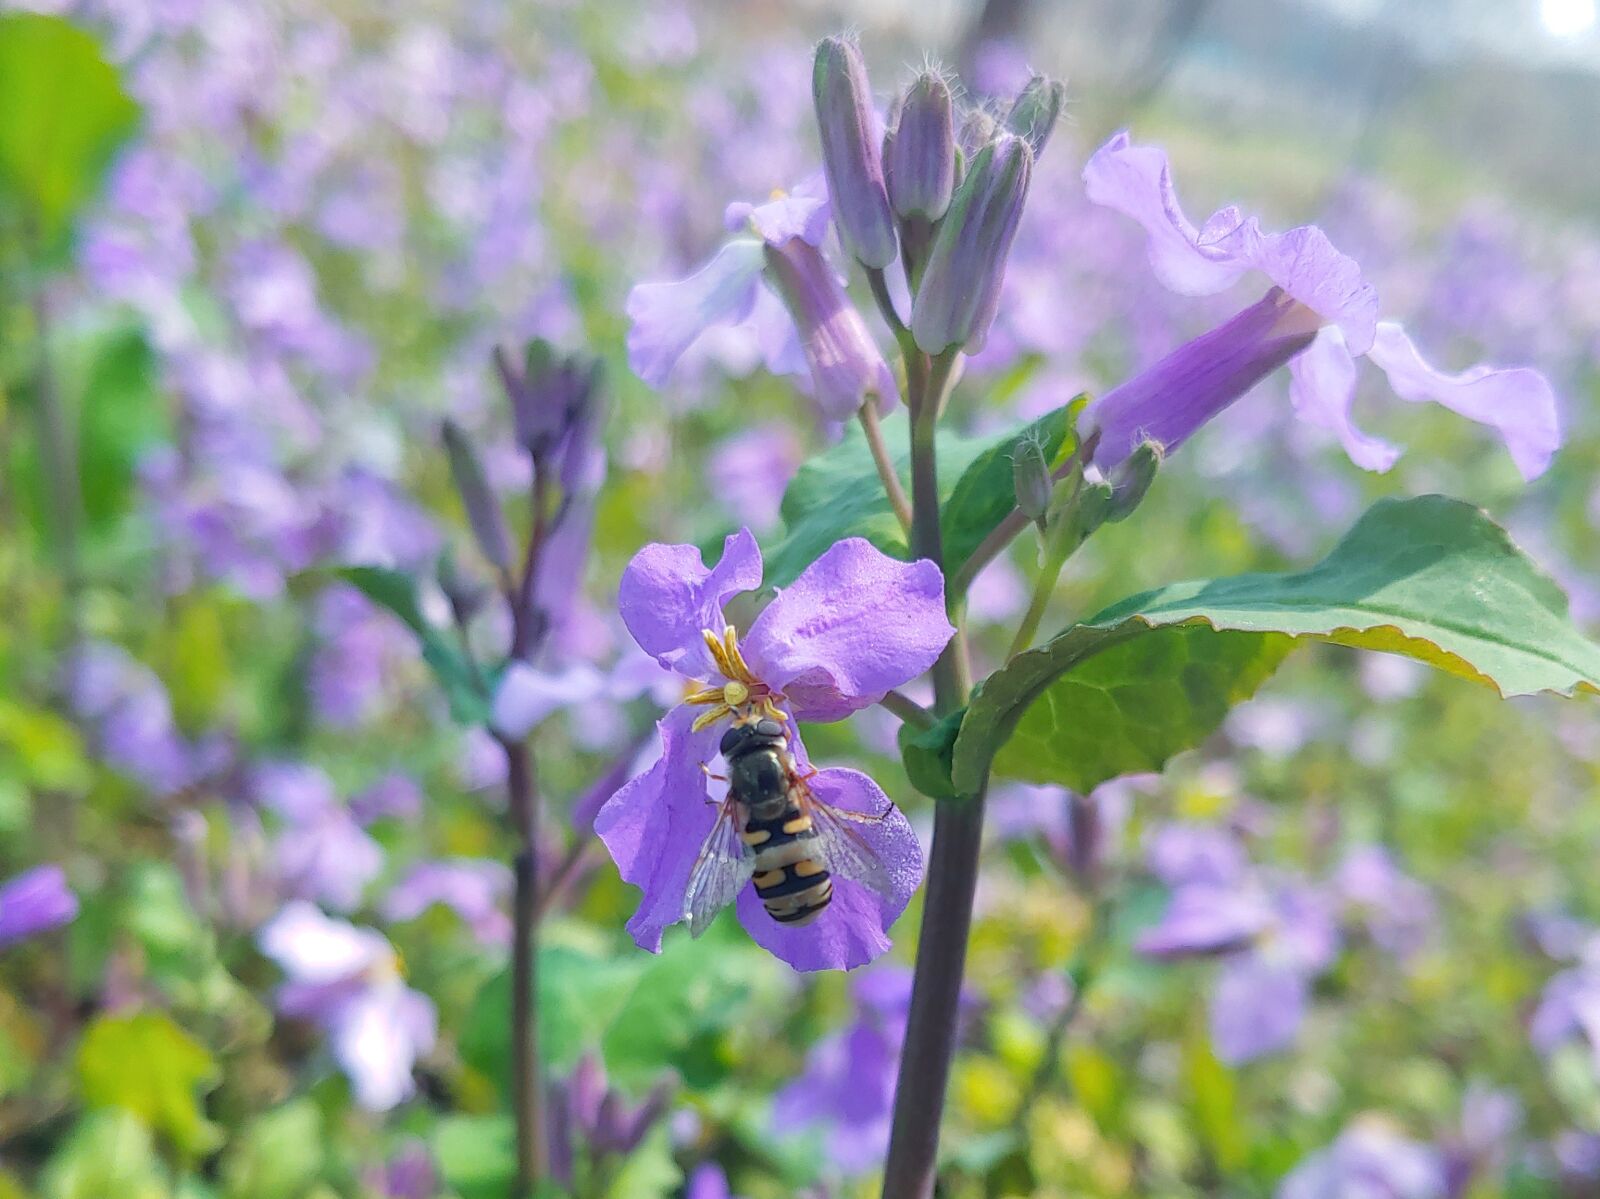 LG G7 THINQ sample photo. Clean rapeseed, insects, bee photography